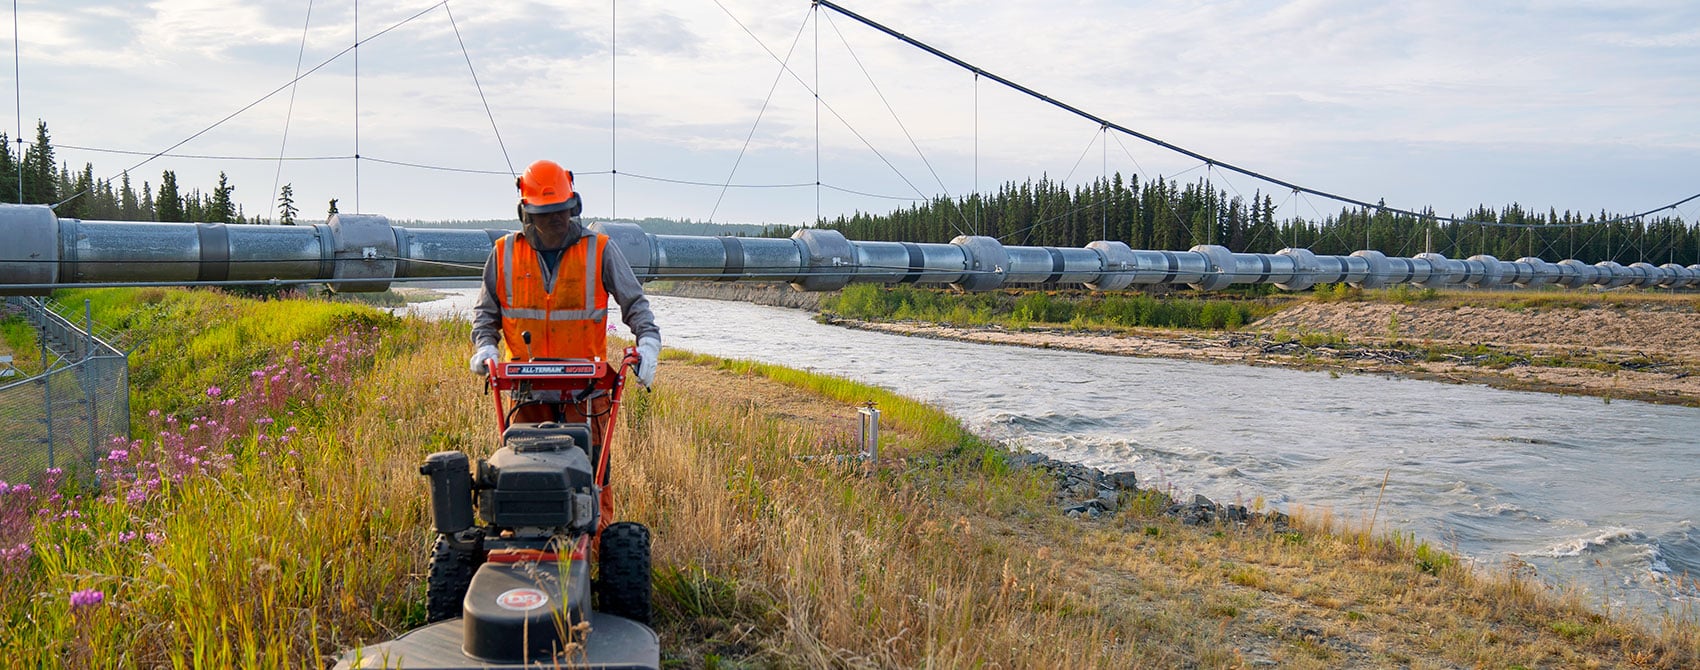 Workers mows back grass along the river with the Alaska pipeline crossing behind.